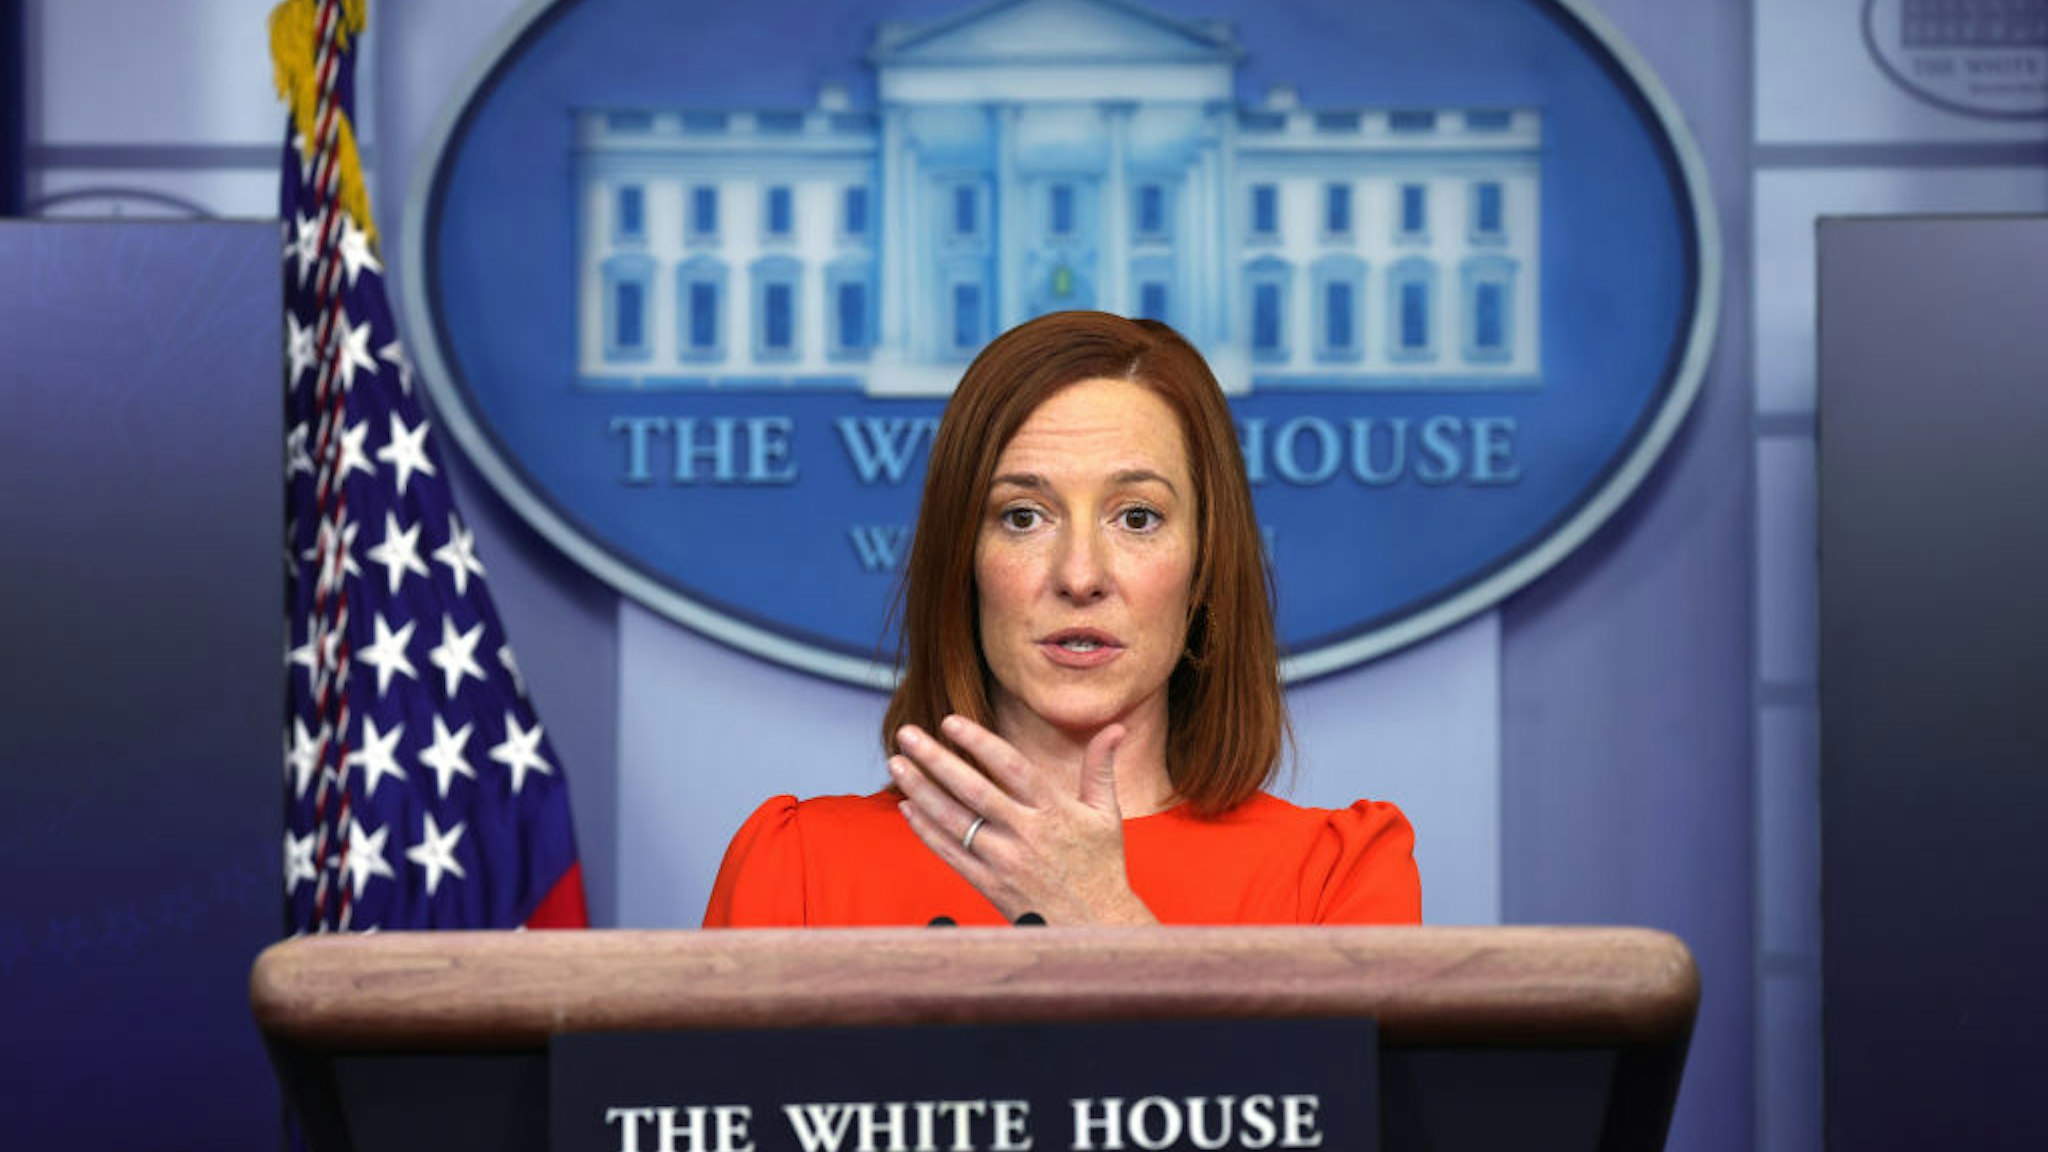 WASHINGTON, DC - JANUARY 21: White House Press Secretary Jen Psaki speaks during a press briefing at the James Brady Press Briefing Room of the White House January 21, 2021 in Washington, DC. Psaki held her second press briefing since President Joe Biden took office yesterday. (Photo by Alex Wong/Getty Images)